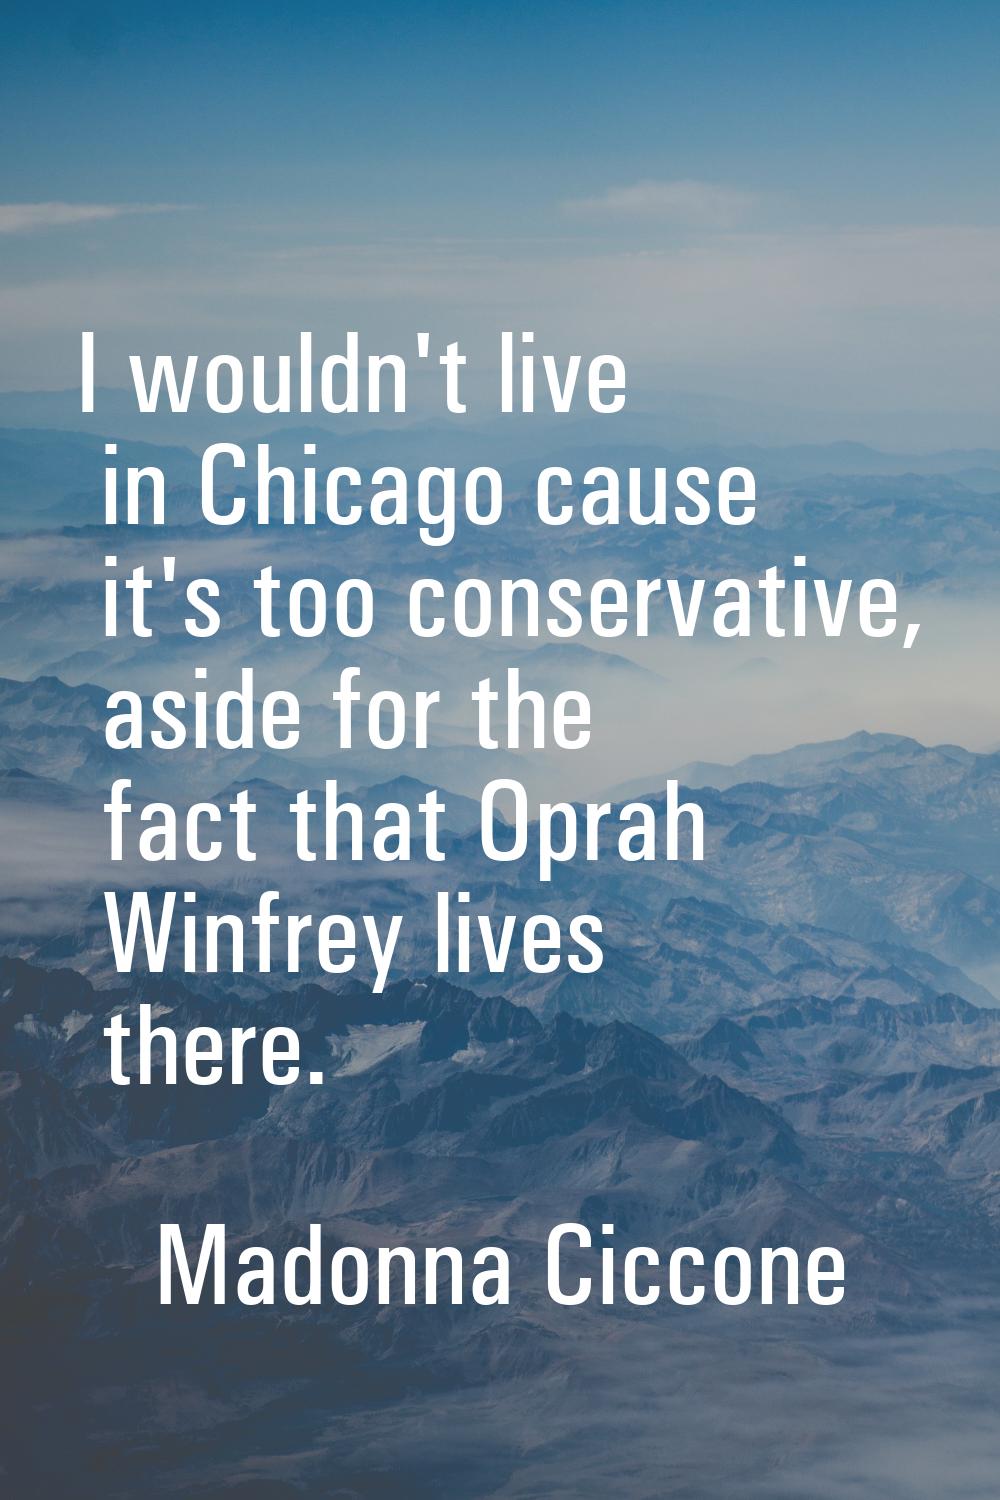 I wouldn't live in Chicago cause it's too conservative, aside for the fact that Oprah Winfrey lives